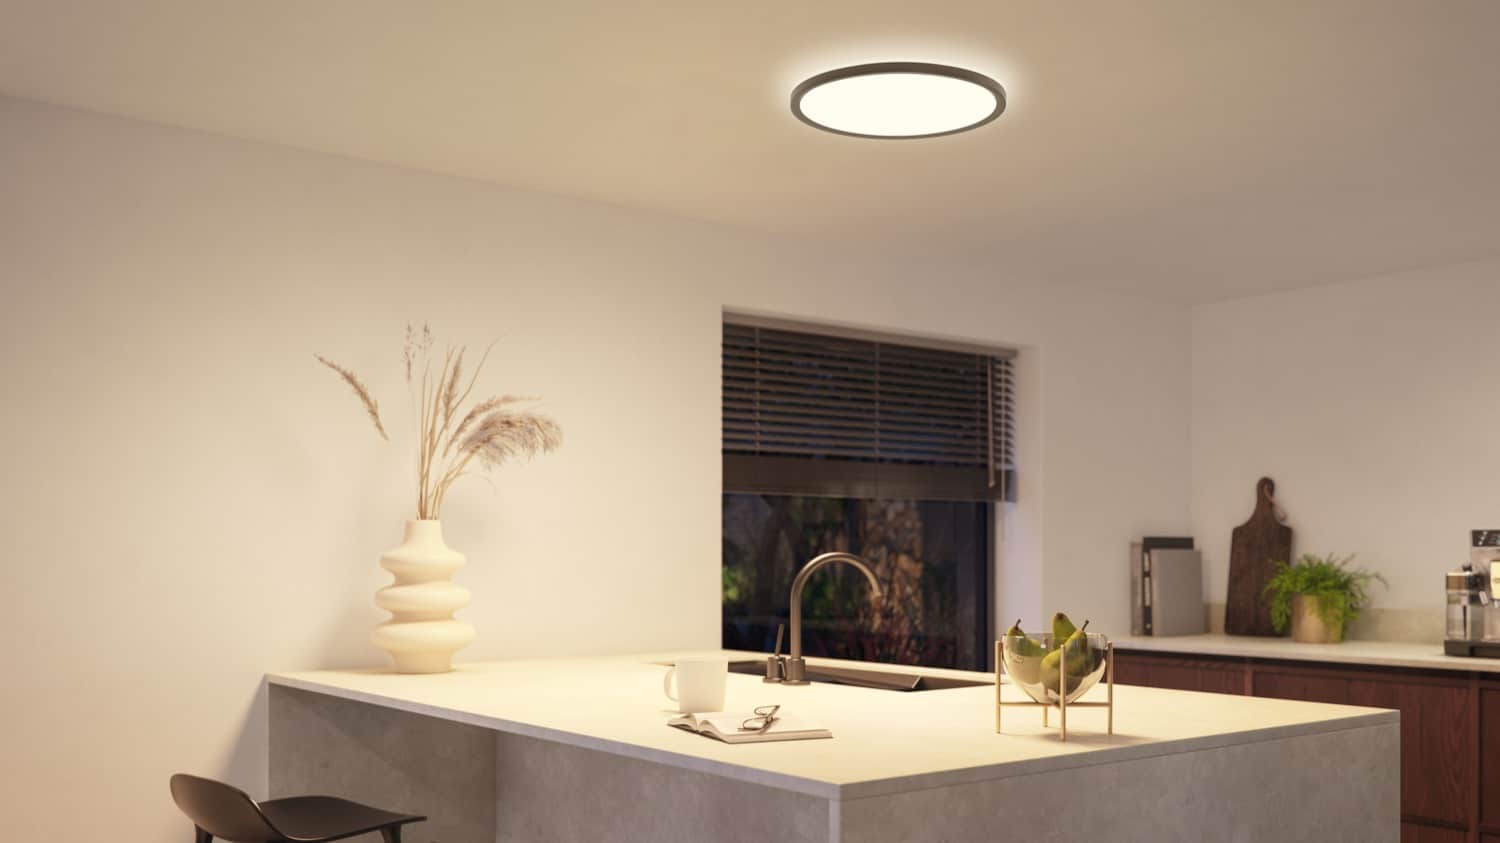 Philips Hue launches new Tento ceiling light range: affordability and innovation for the smart home